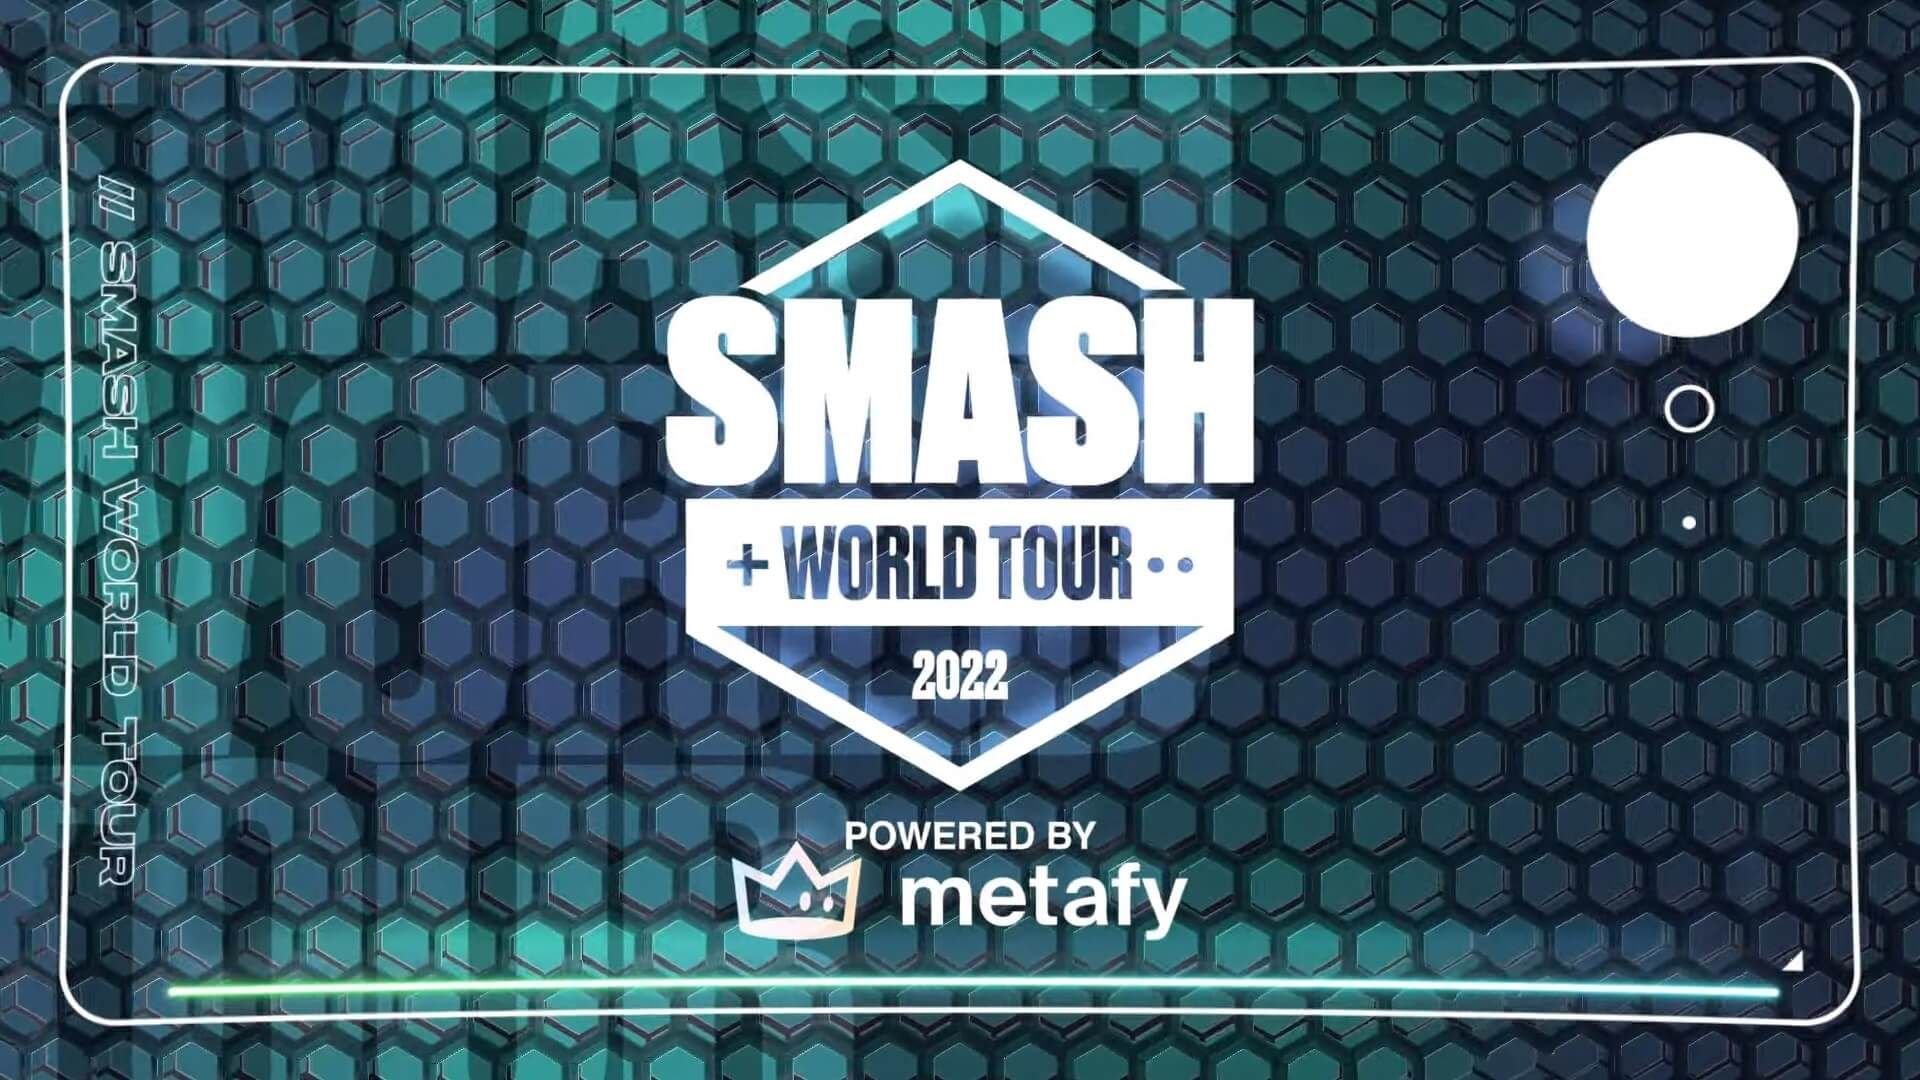 Smash World Tour Controversy Deepens With Latest Statement